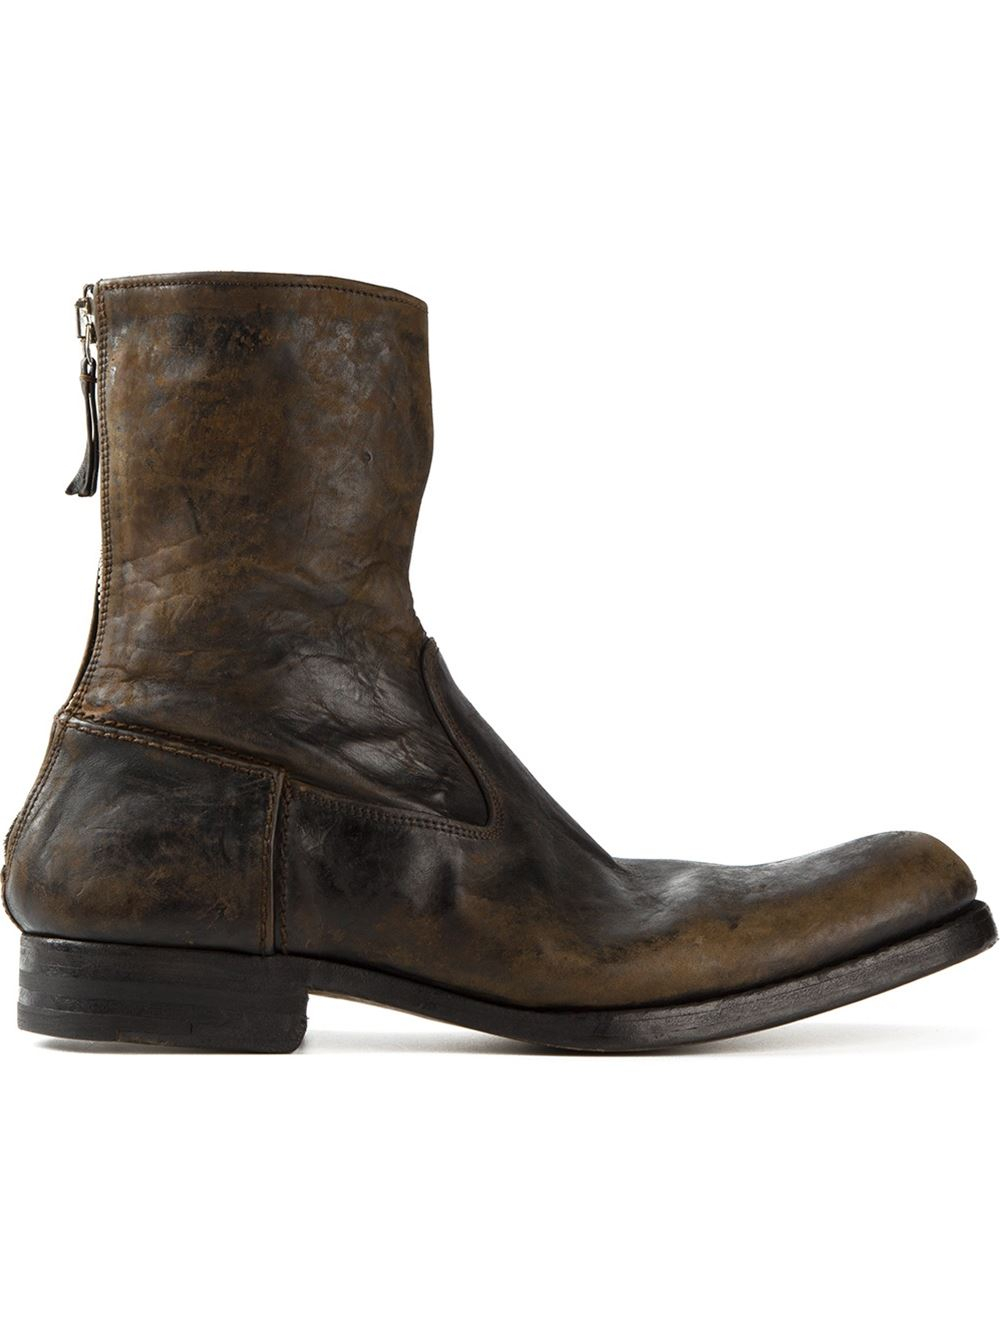 Lyst - Premiata Distressed Ankle Boots in Brown for Men